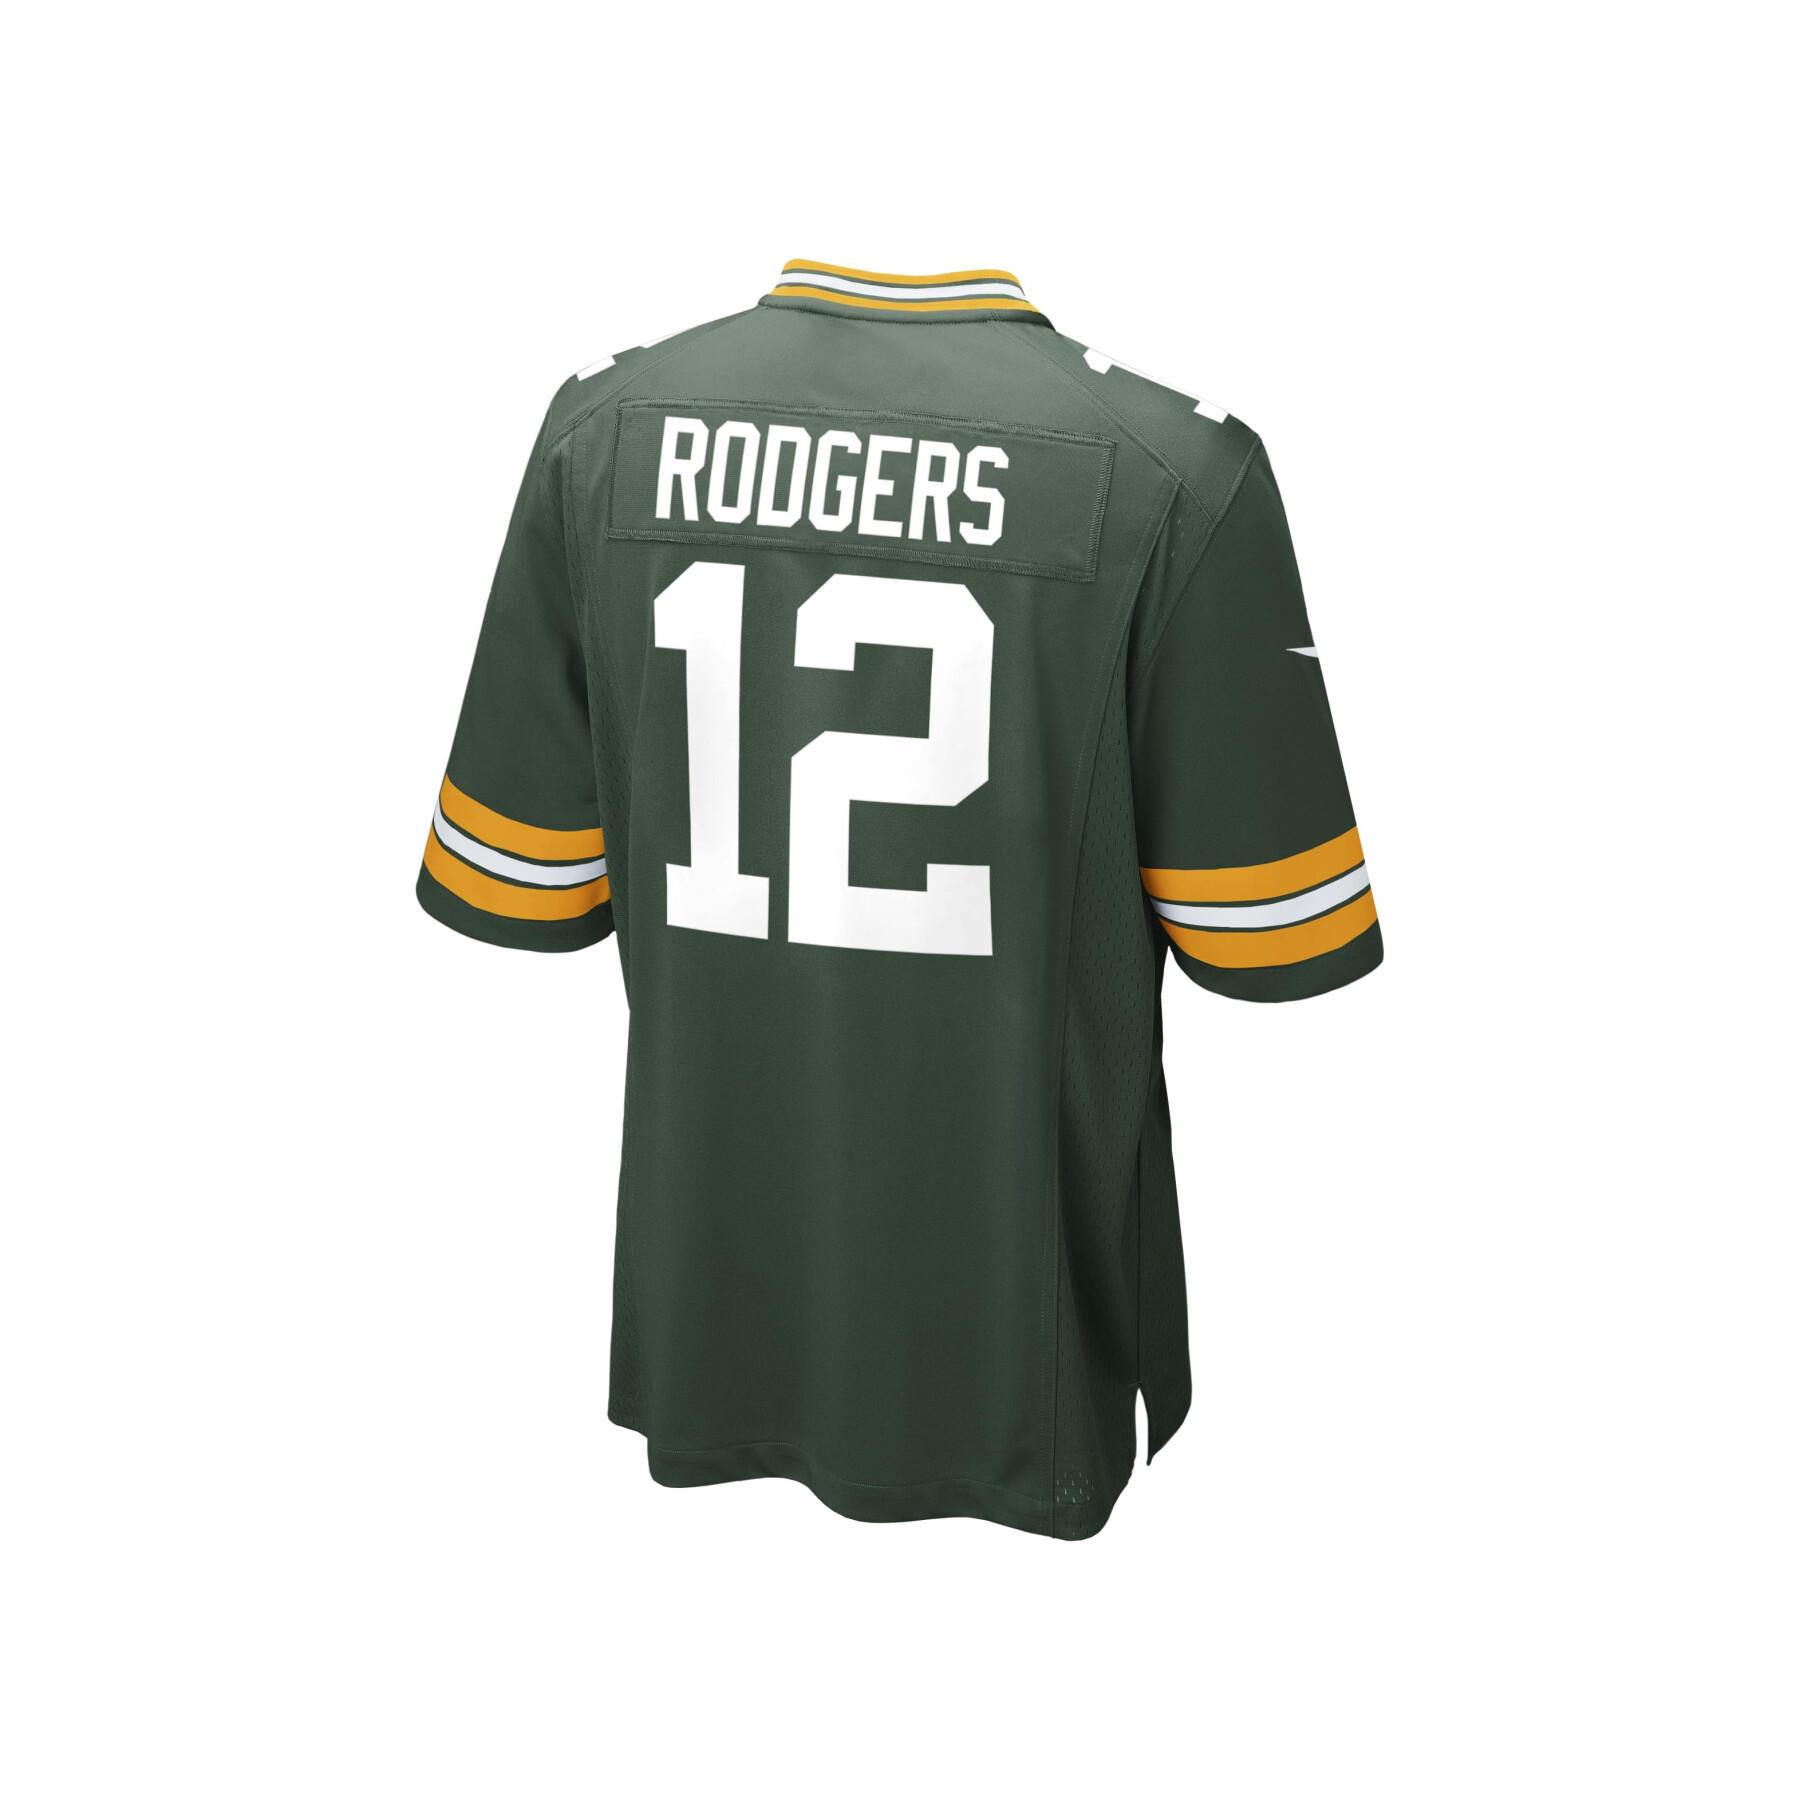 Maillot Green Bay Packers "Aaron Rodgers" Saison 2021/22